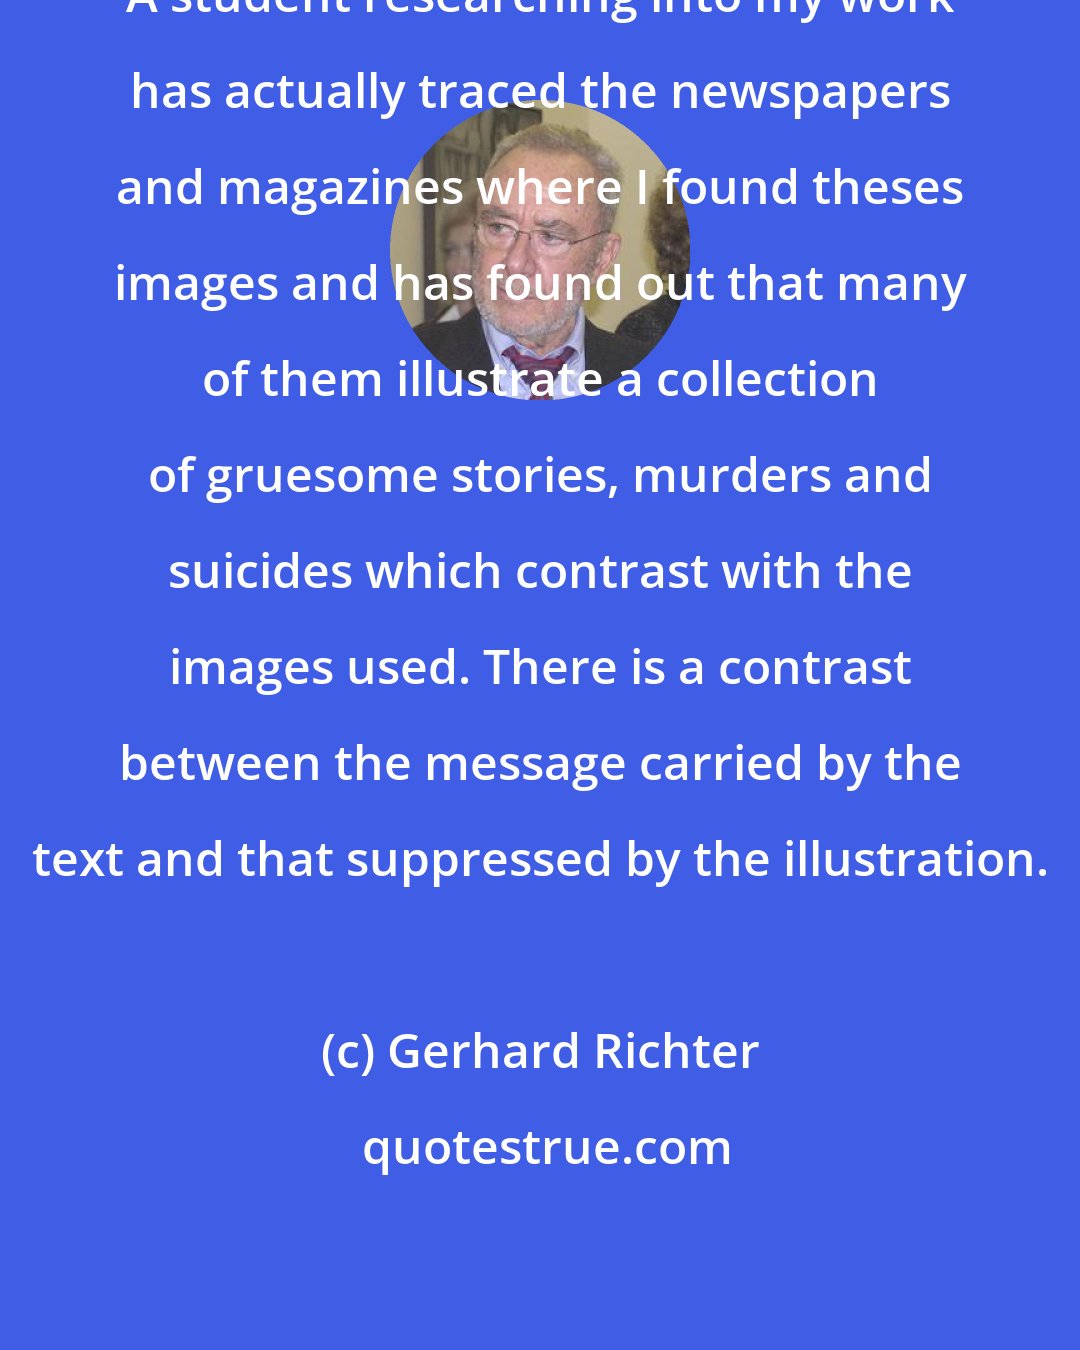 Gerhard Richter: A student researching into my work has actually traced the newspapers and magazines where I found theses images and has found out that many of them illustrate a collection of gruesome stories, murders and suicides which contrast with the images used. There is a contrast between the message carried by the text and that suppressed by the illustration.